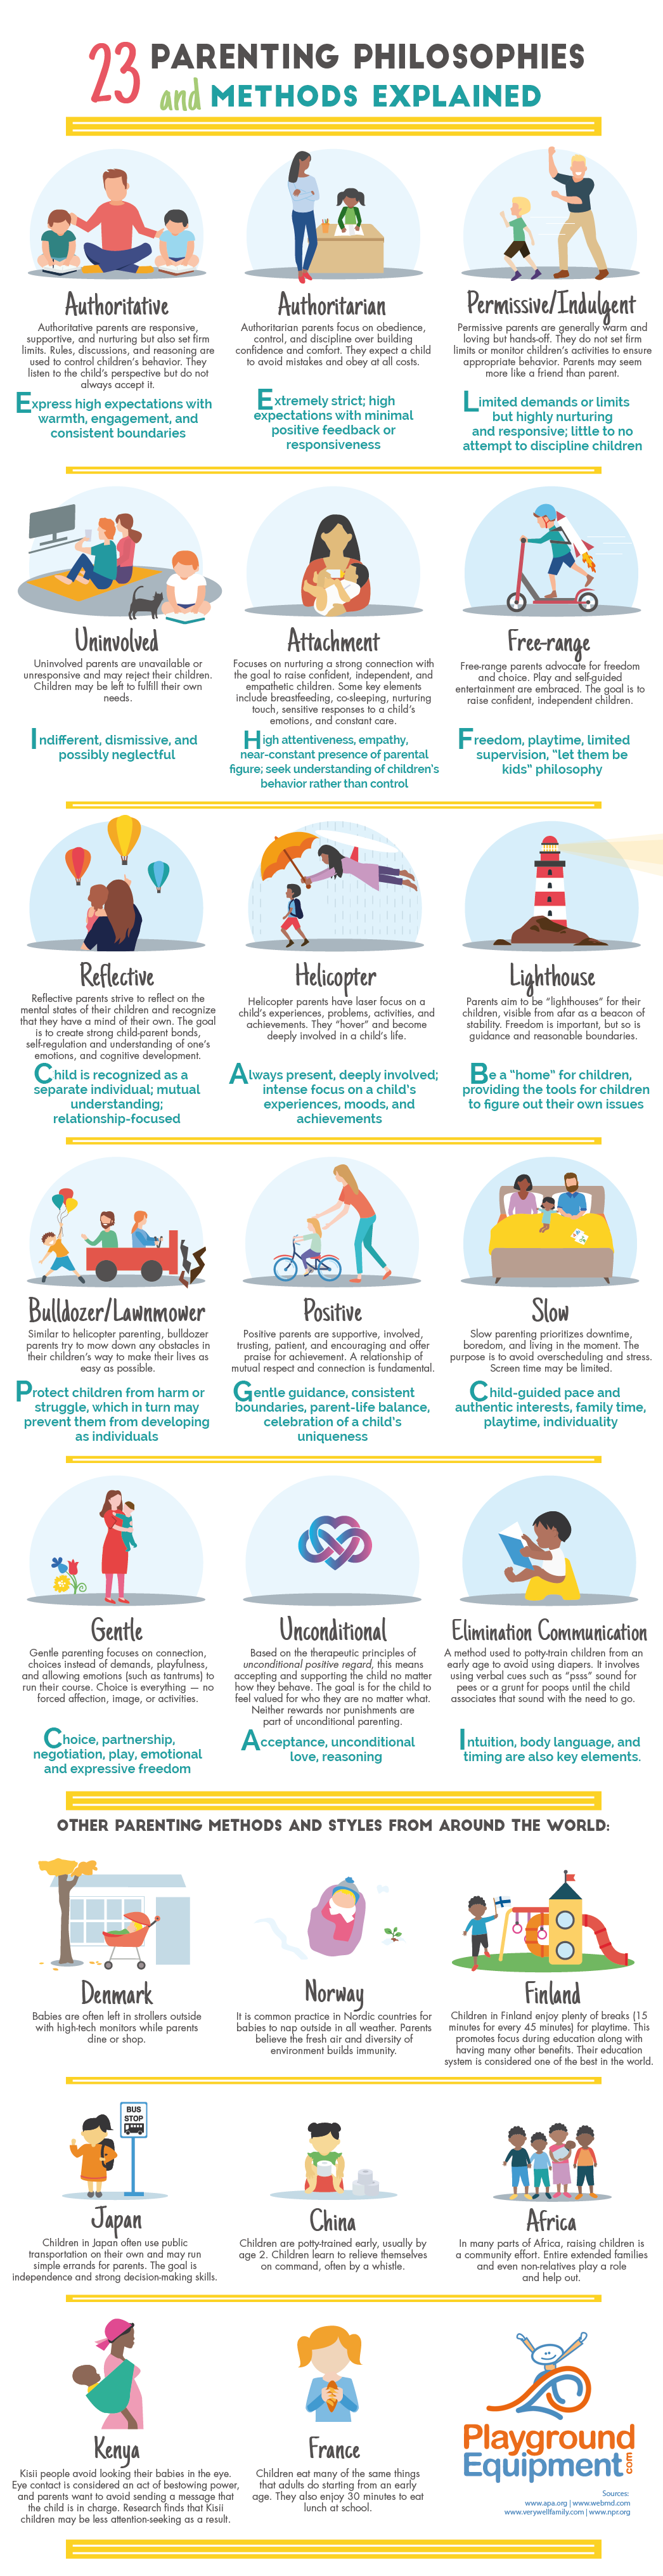 23 Parenting Philosophies and Methods Explained - PlaygroundEquipment.com - Infographic